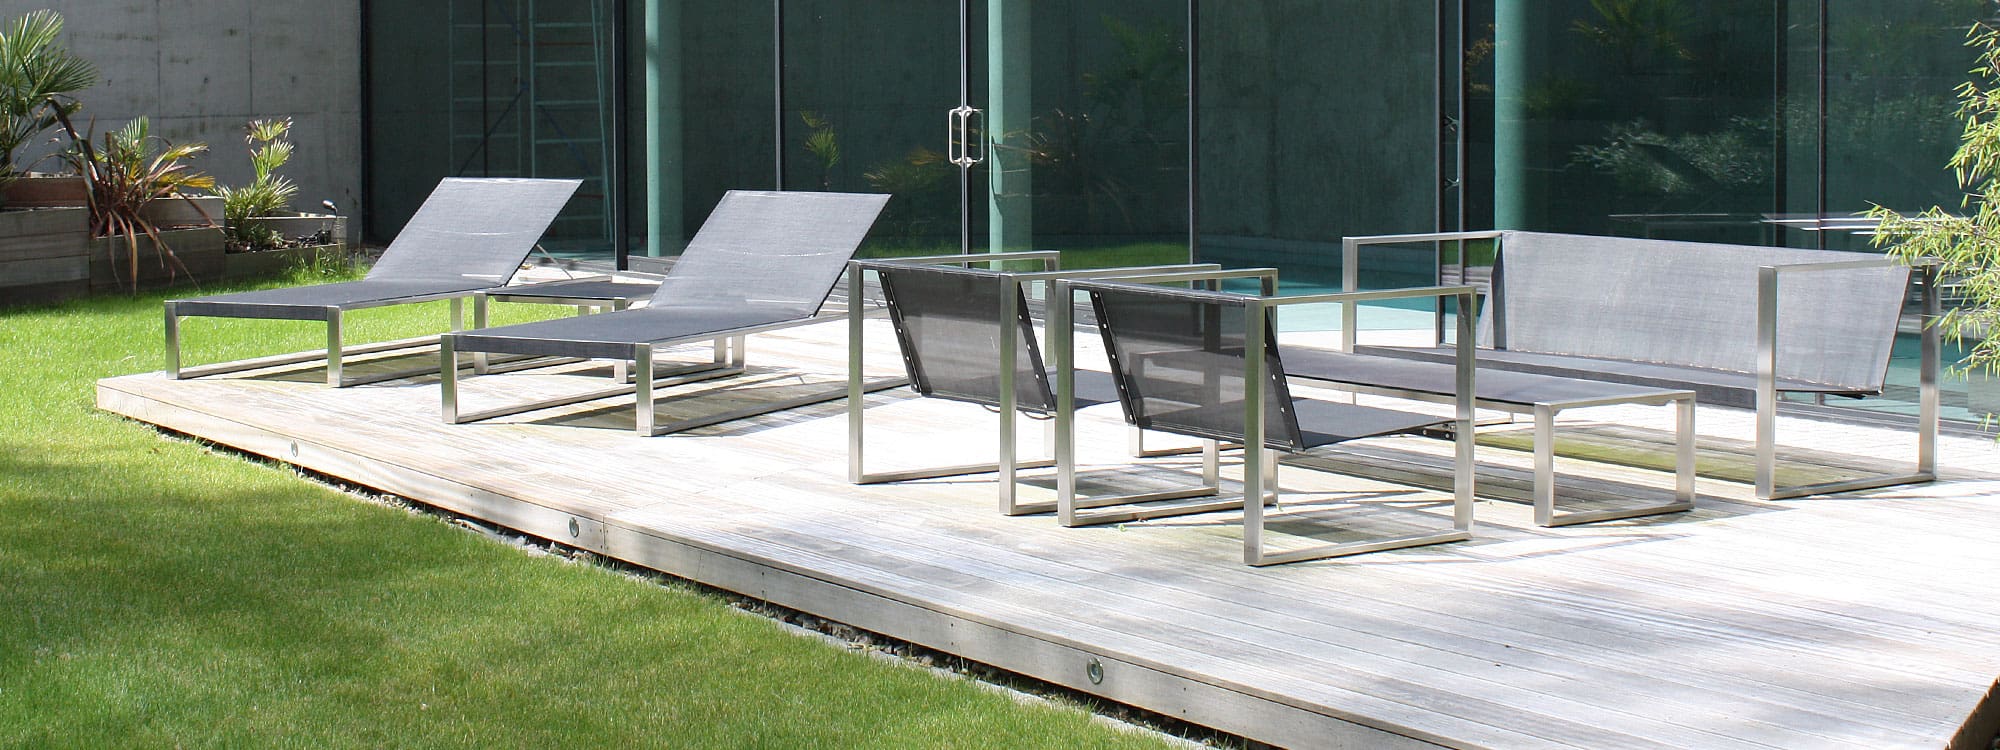 Image of FueraDentro Cima Lounge garden sofa and lounge chairs, together with Siesta minimalist sun loungers on terrace of RIBA award-winning house